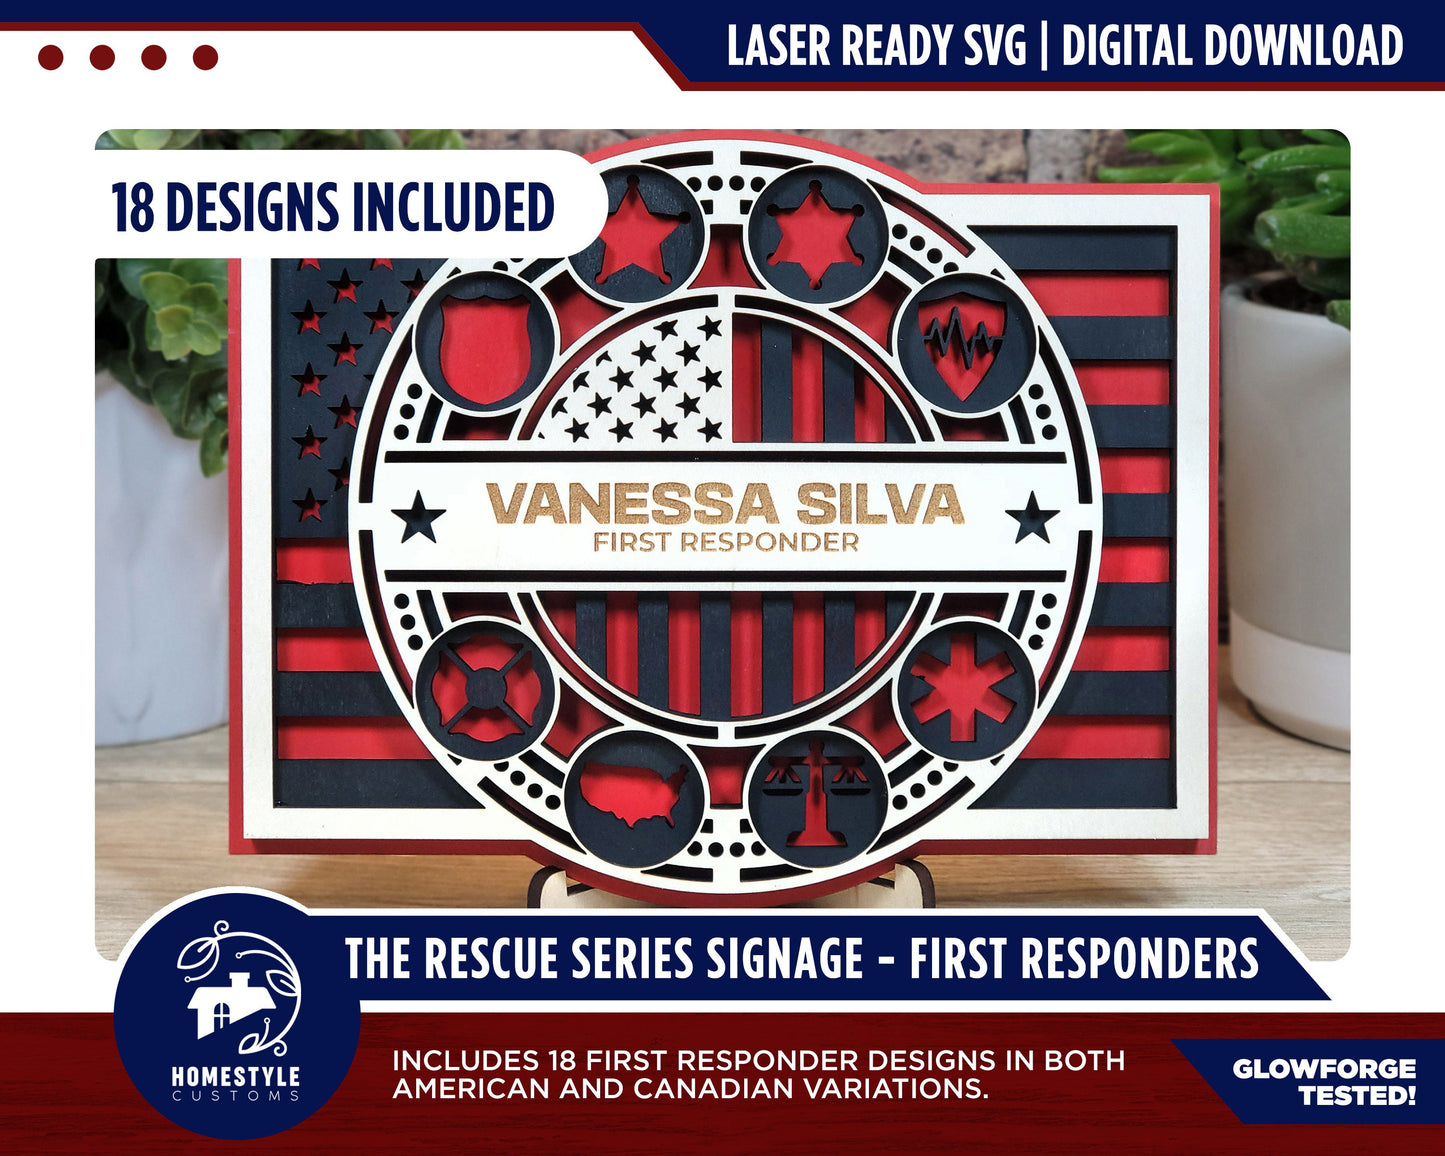 The Rescue Series Signage - First Responder - 9 Designs - SVG File Download - Sized for Glowforge